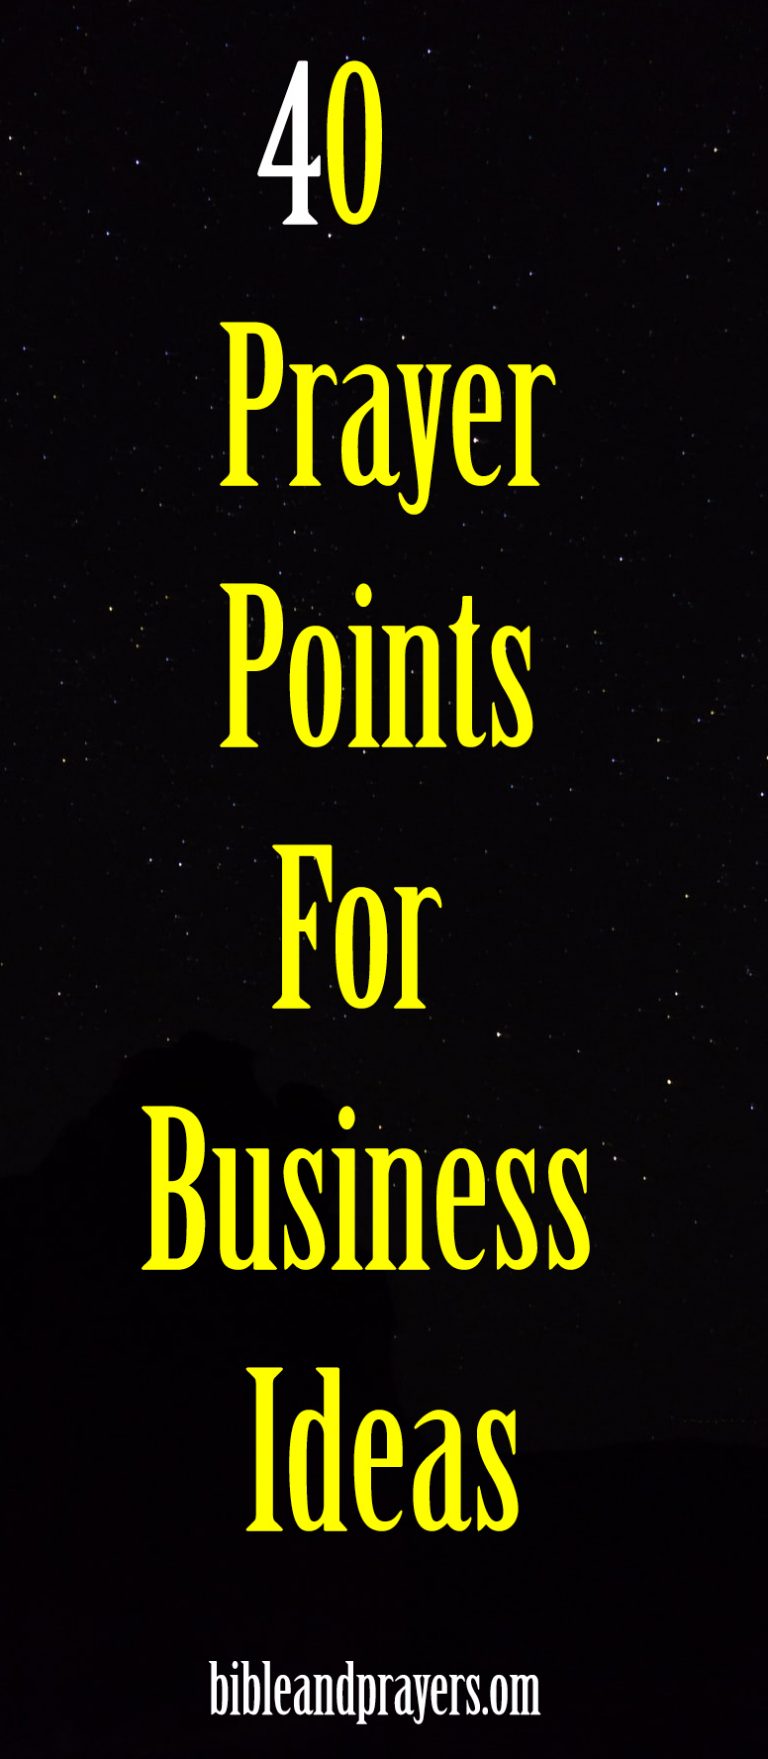 40 Prayer Points For Business Ideas